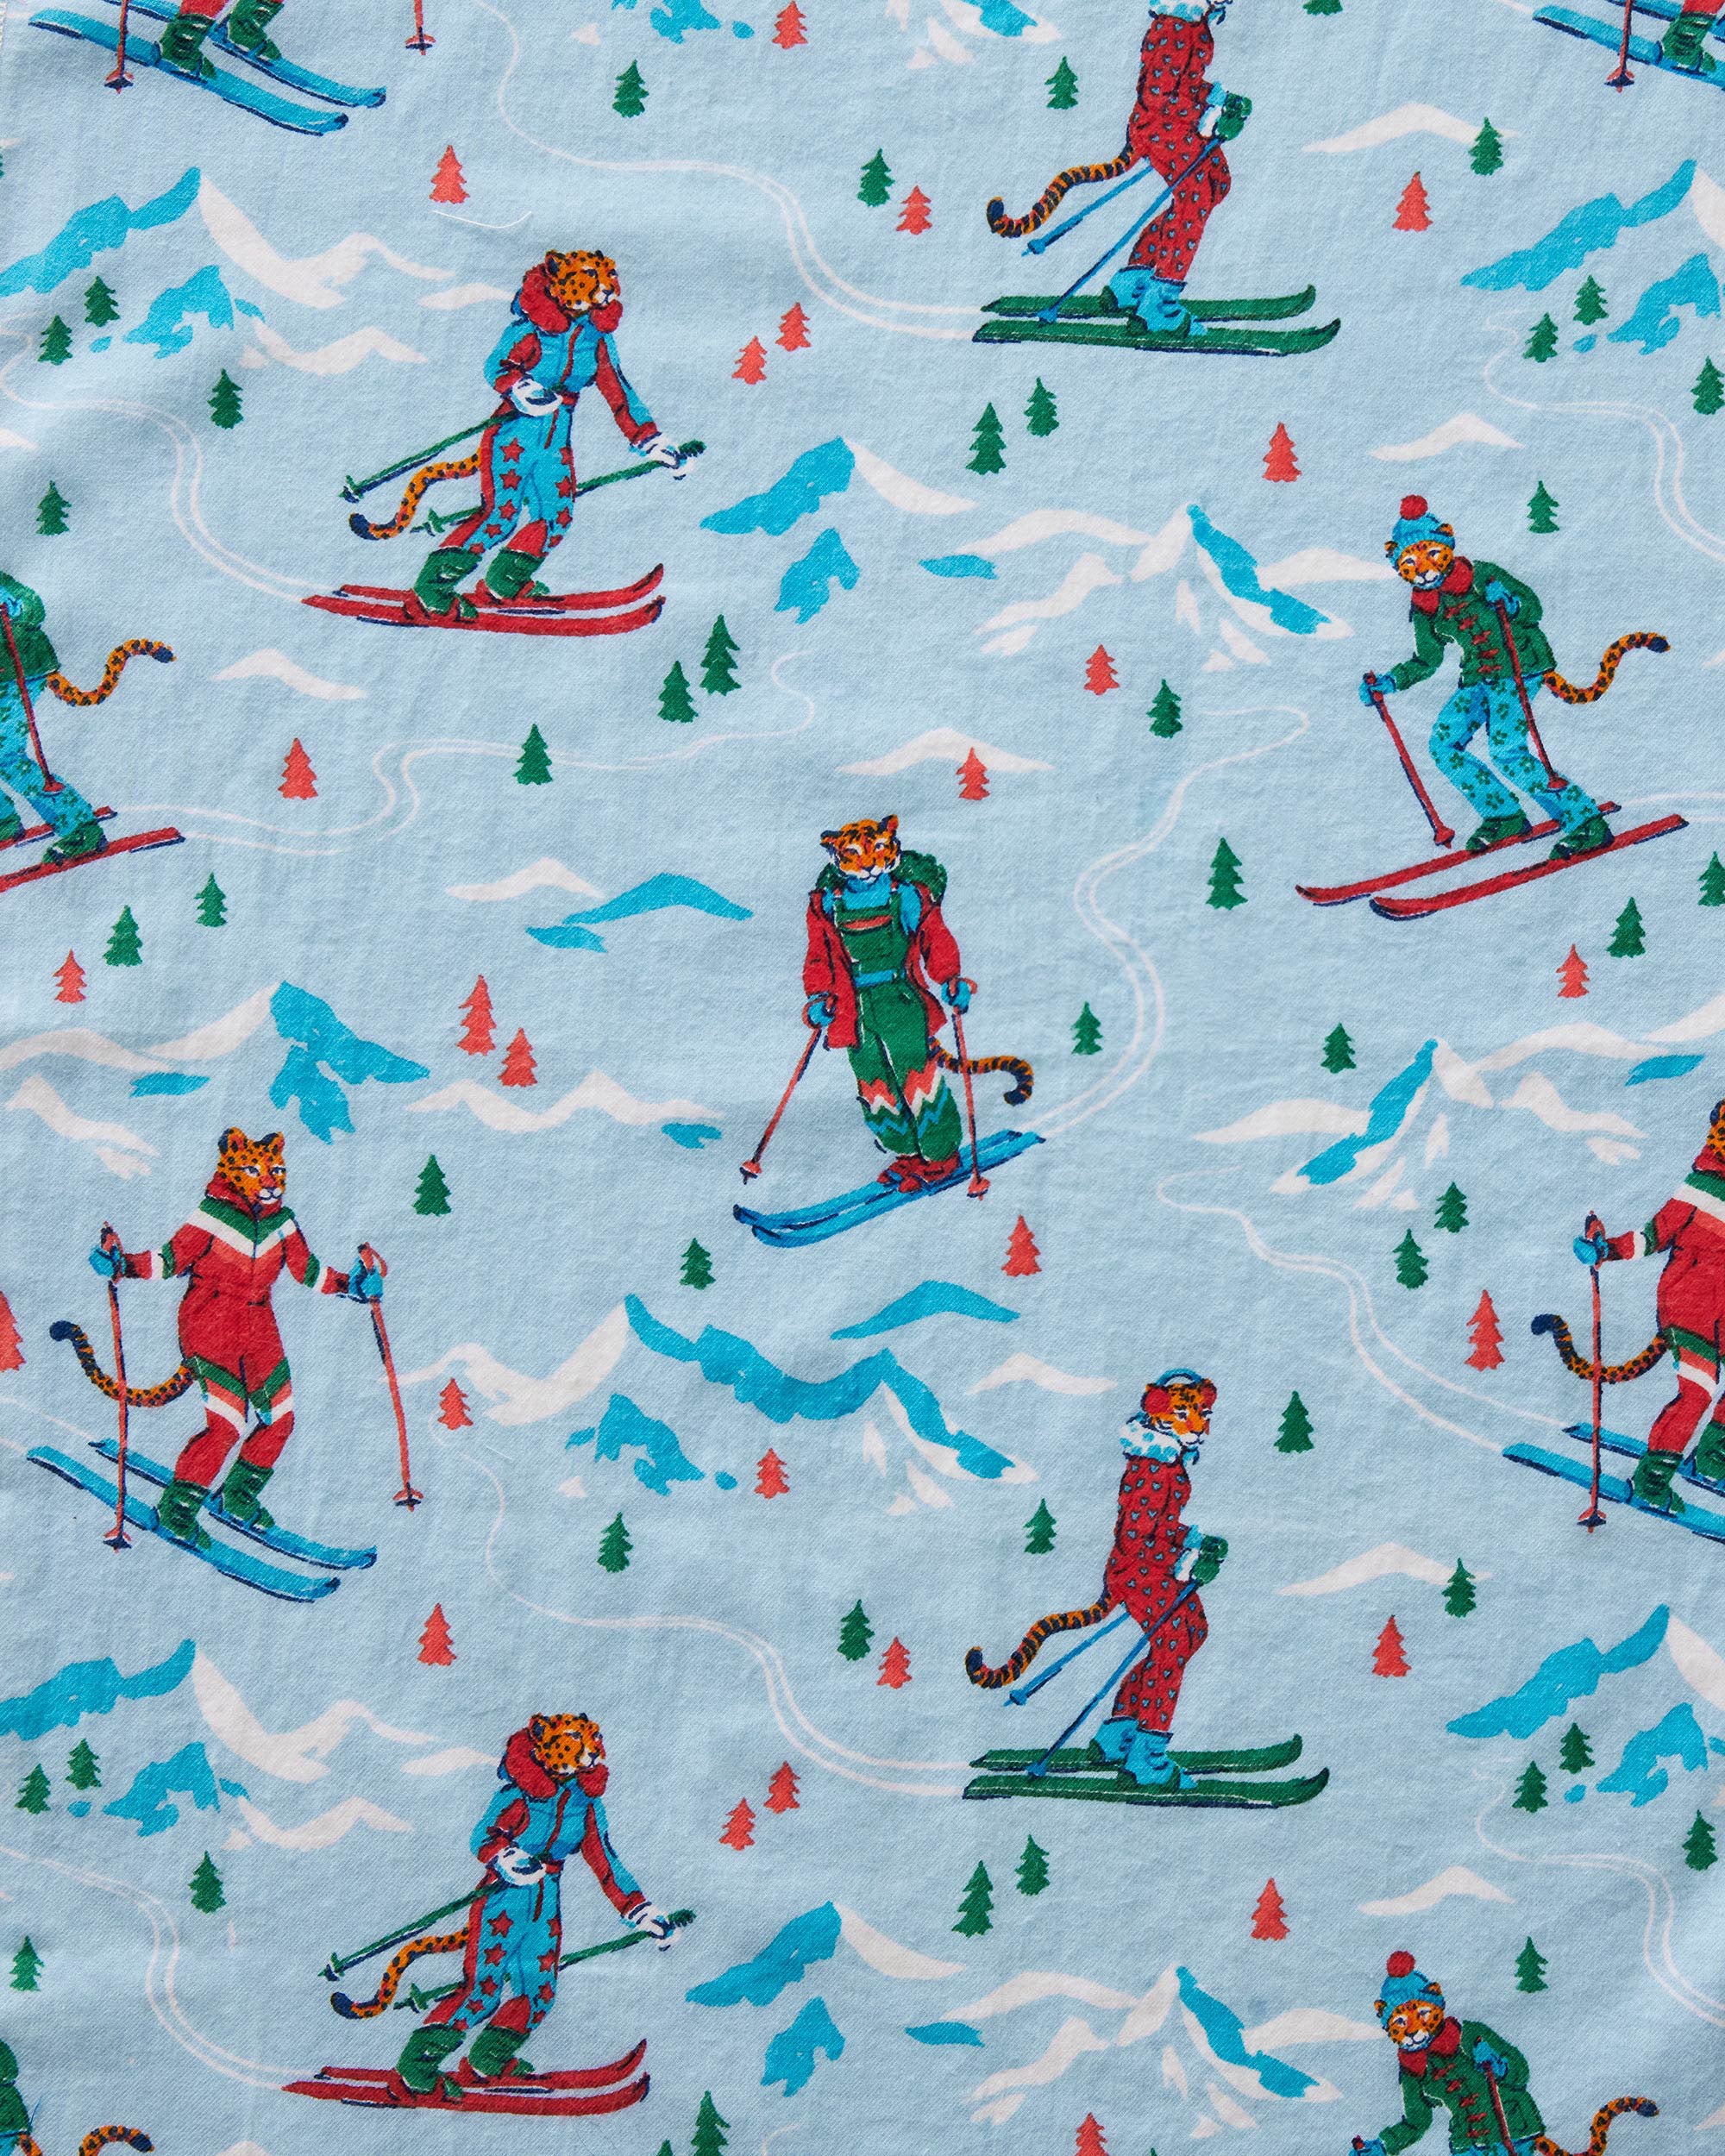 Hit the Slopes - Flannel Sleep Shirt - Frosted Lake - Printfresh